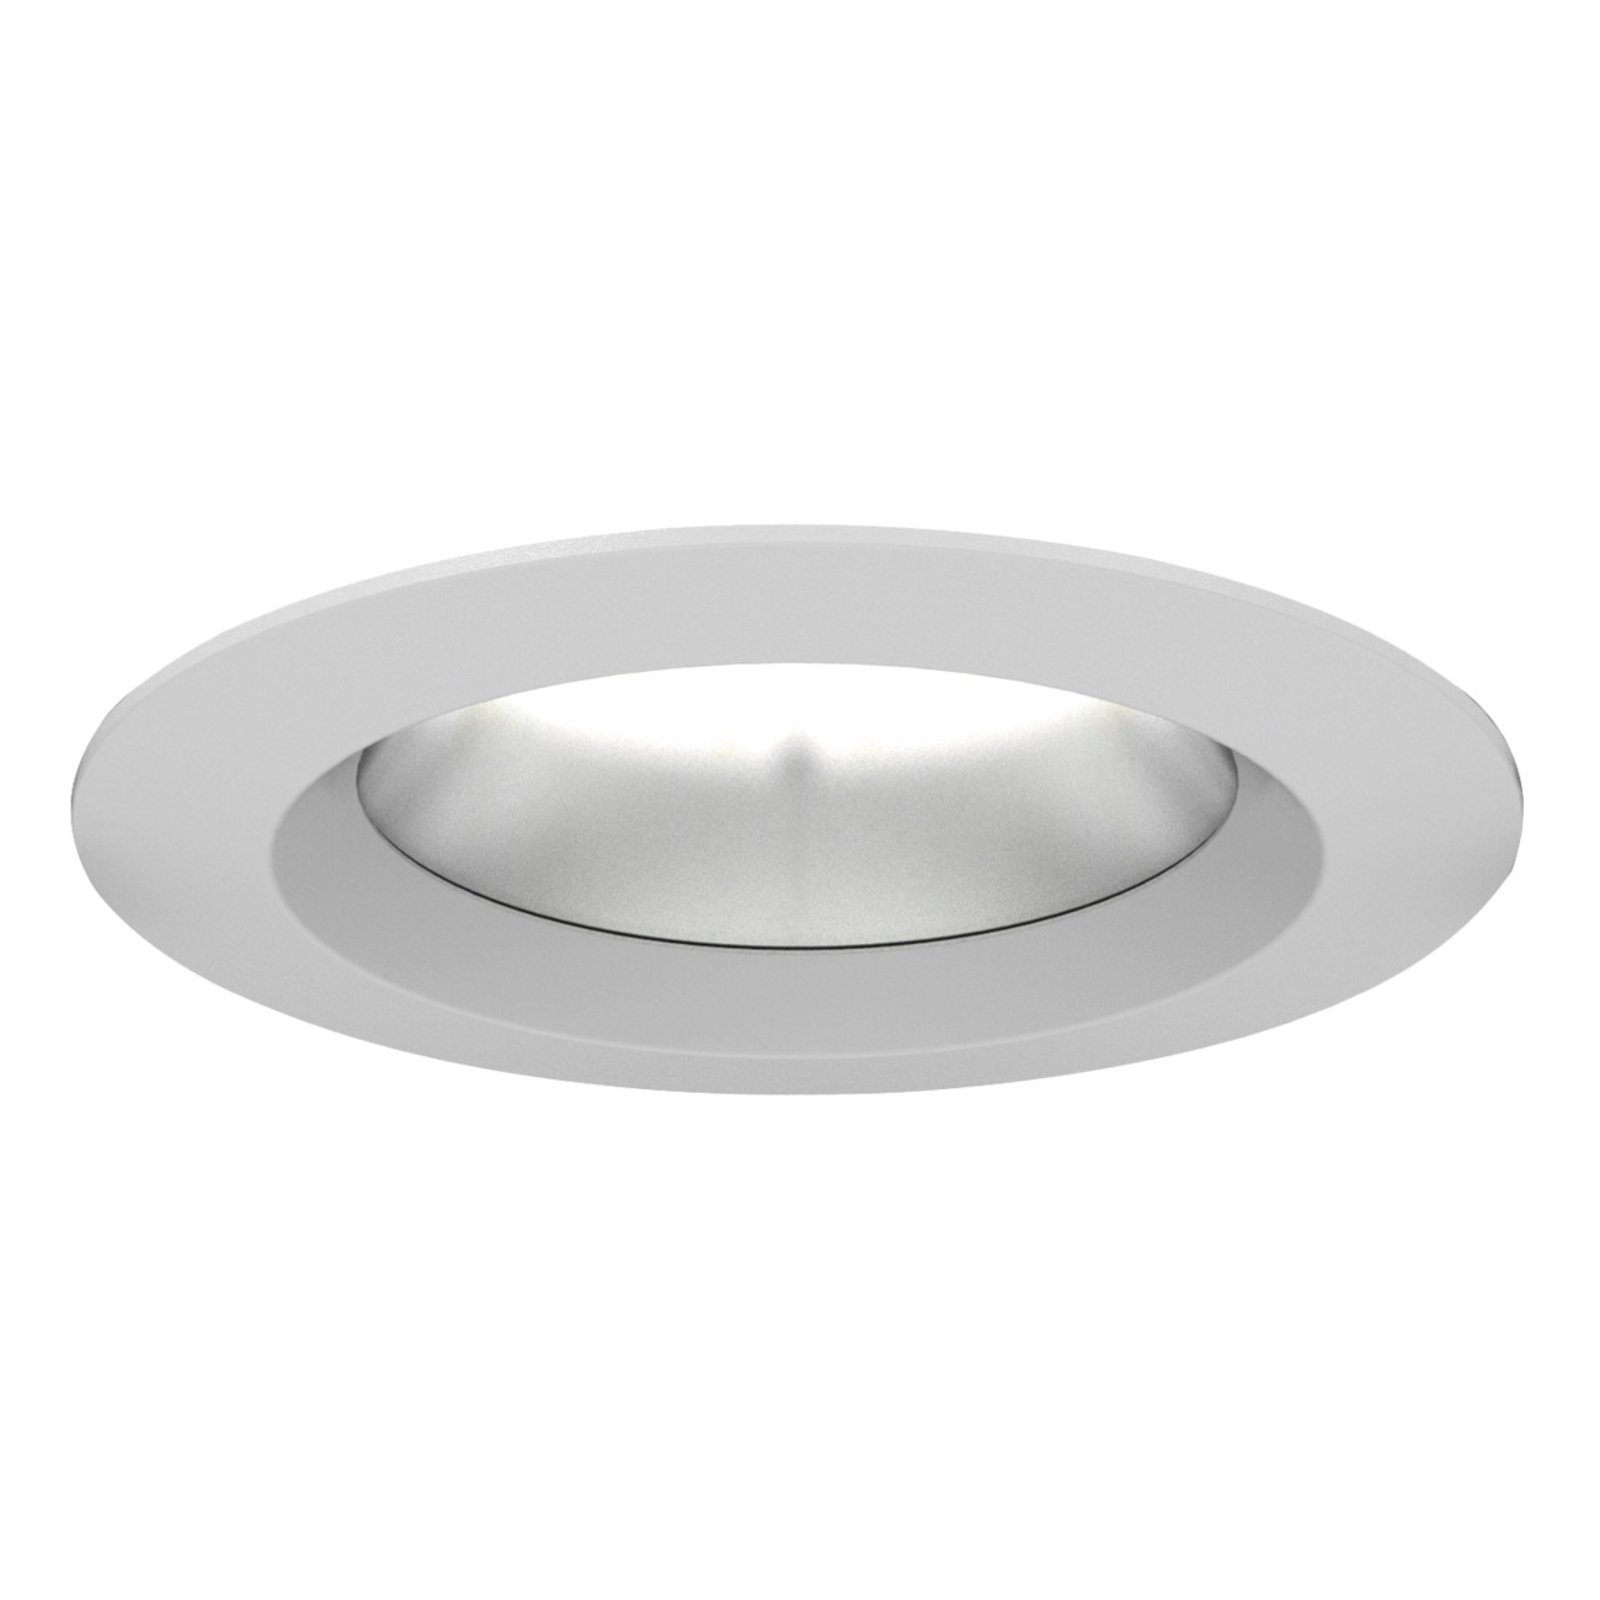 Siteco Lunis 40 IP65 LED downlight dimmable Ø 11cm